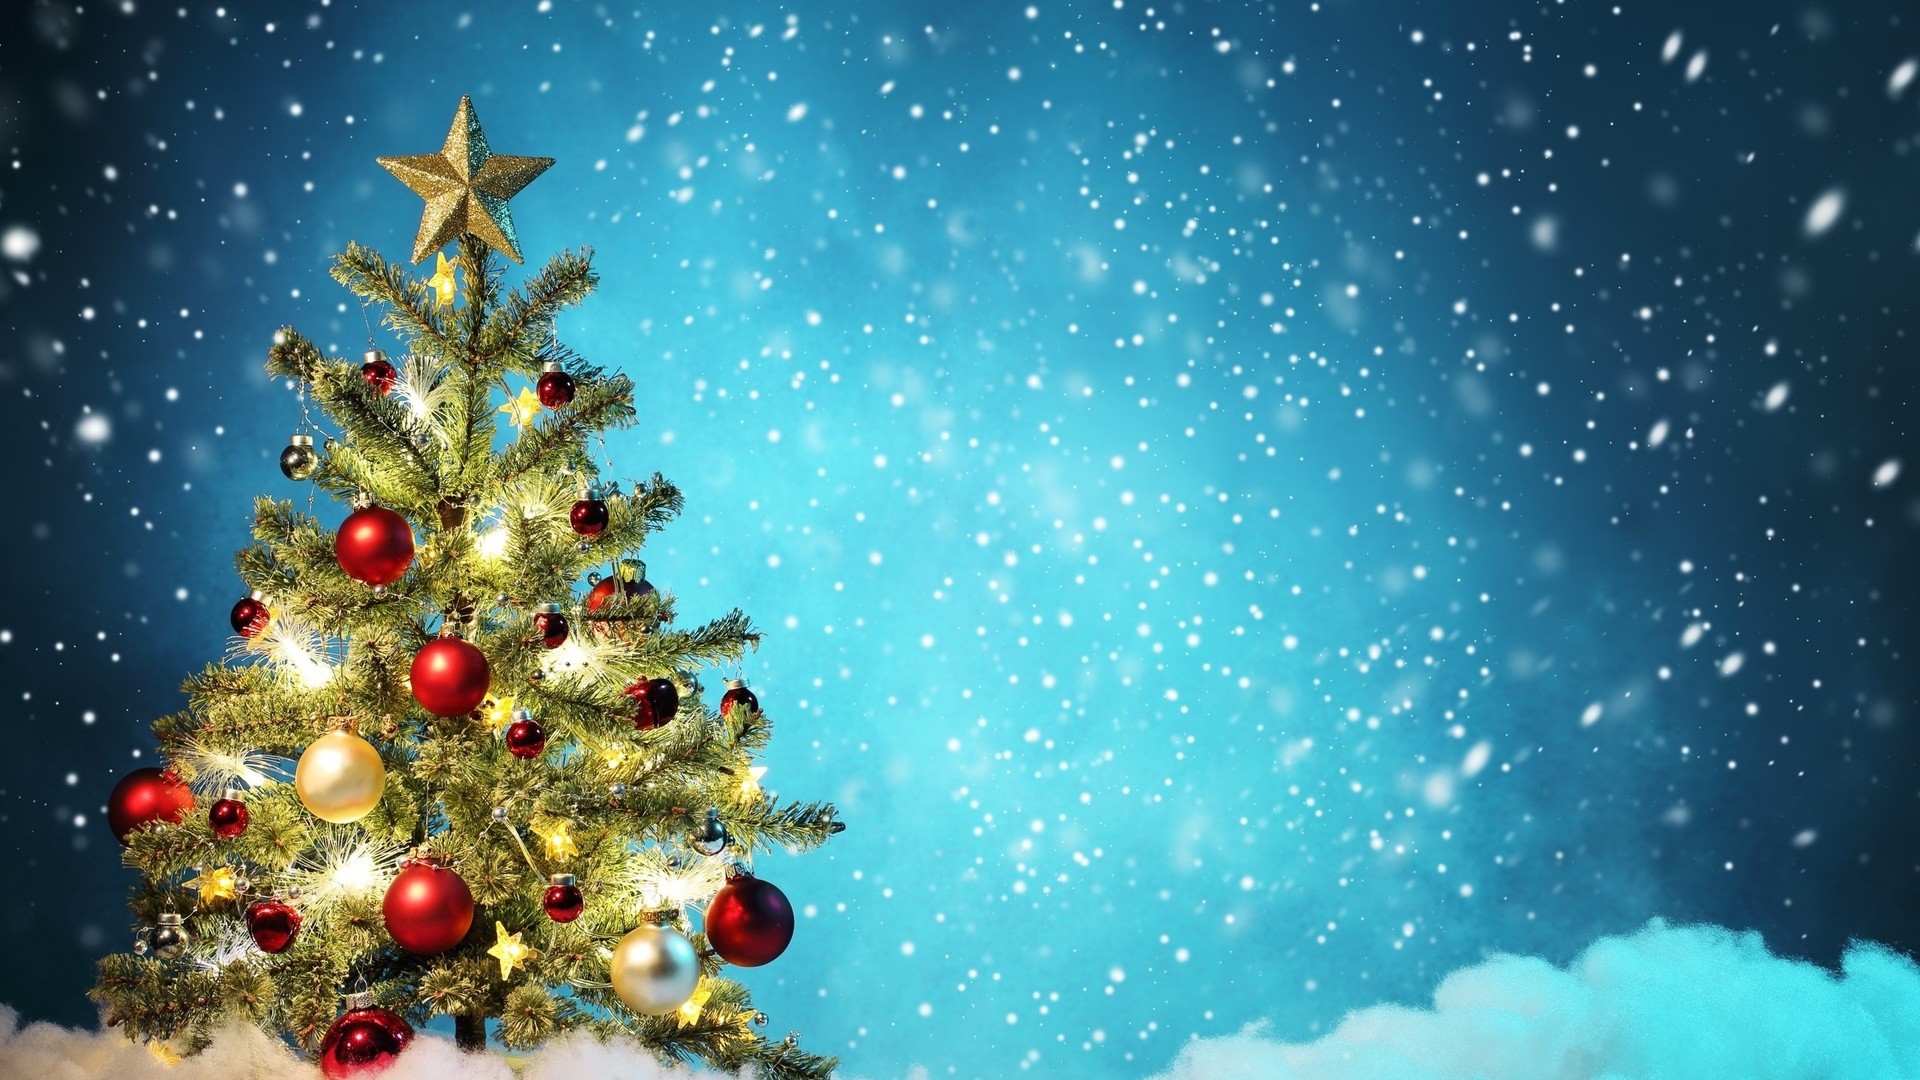 1920x1080 Pictures Christmas Backgrounds.